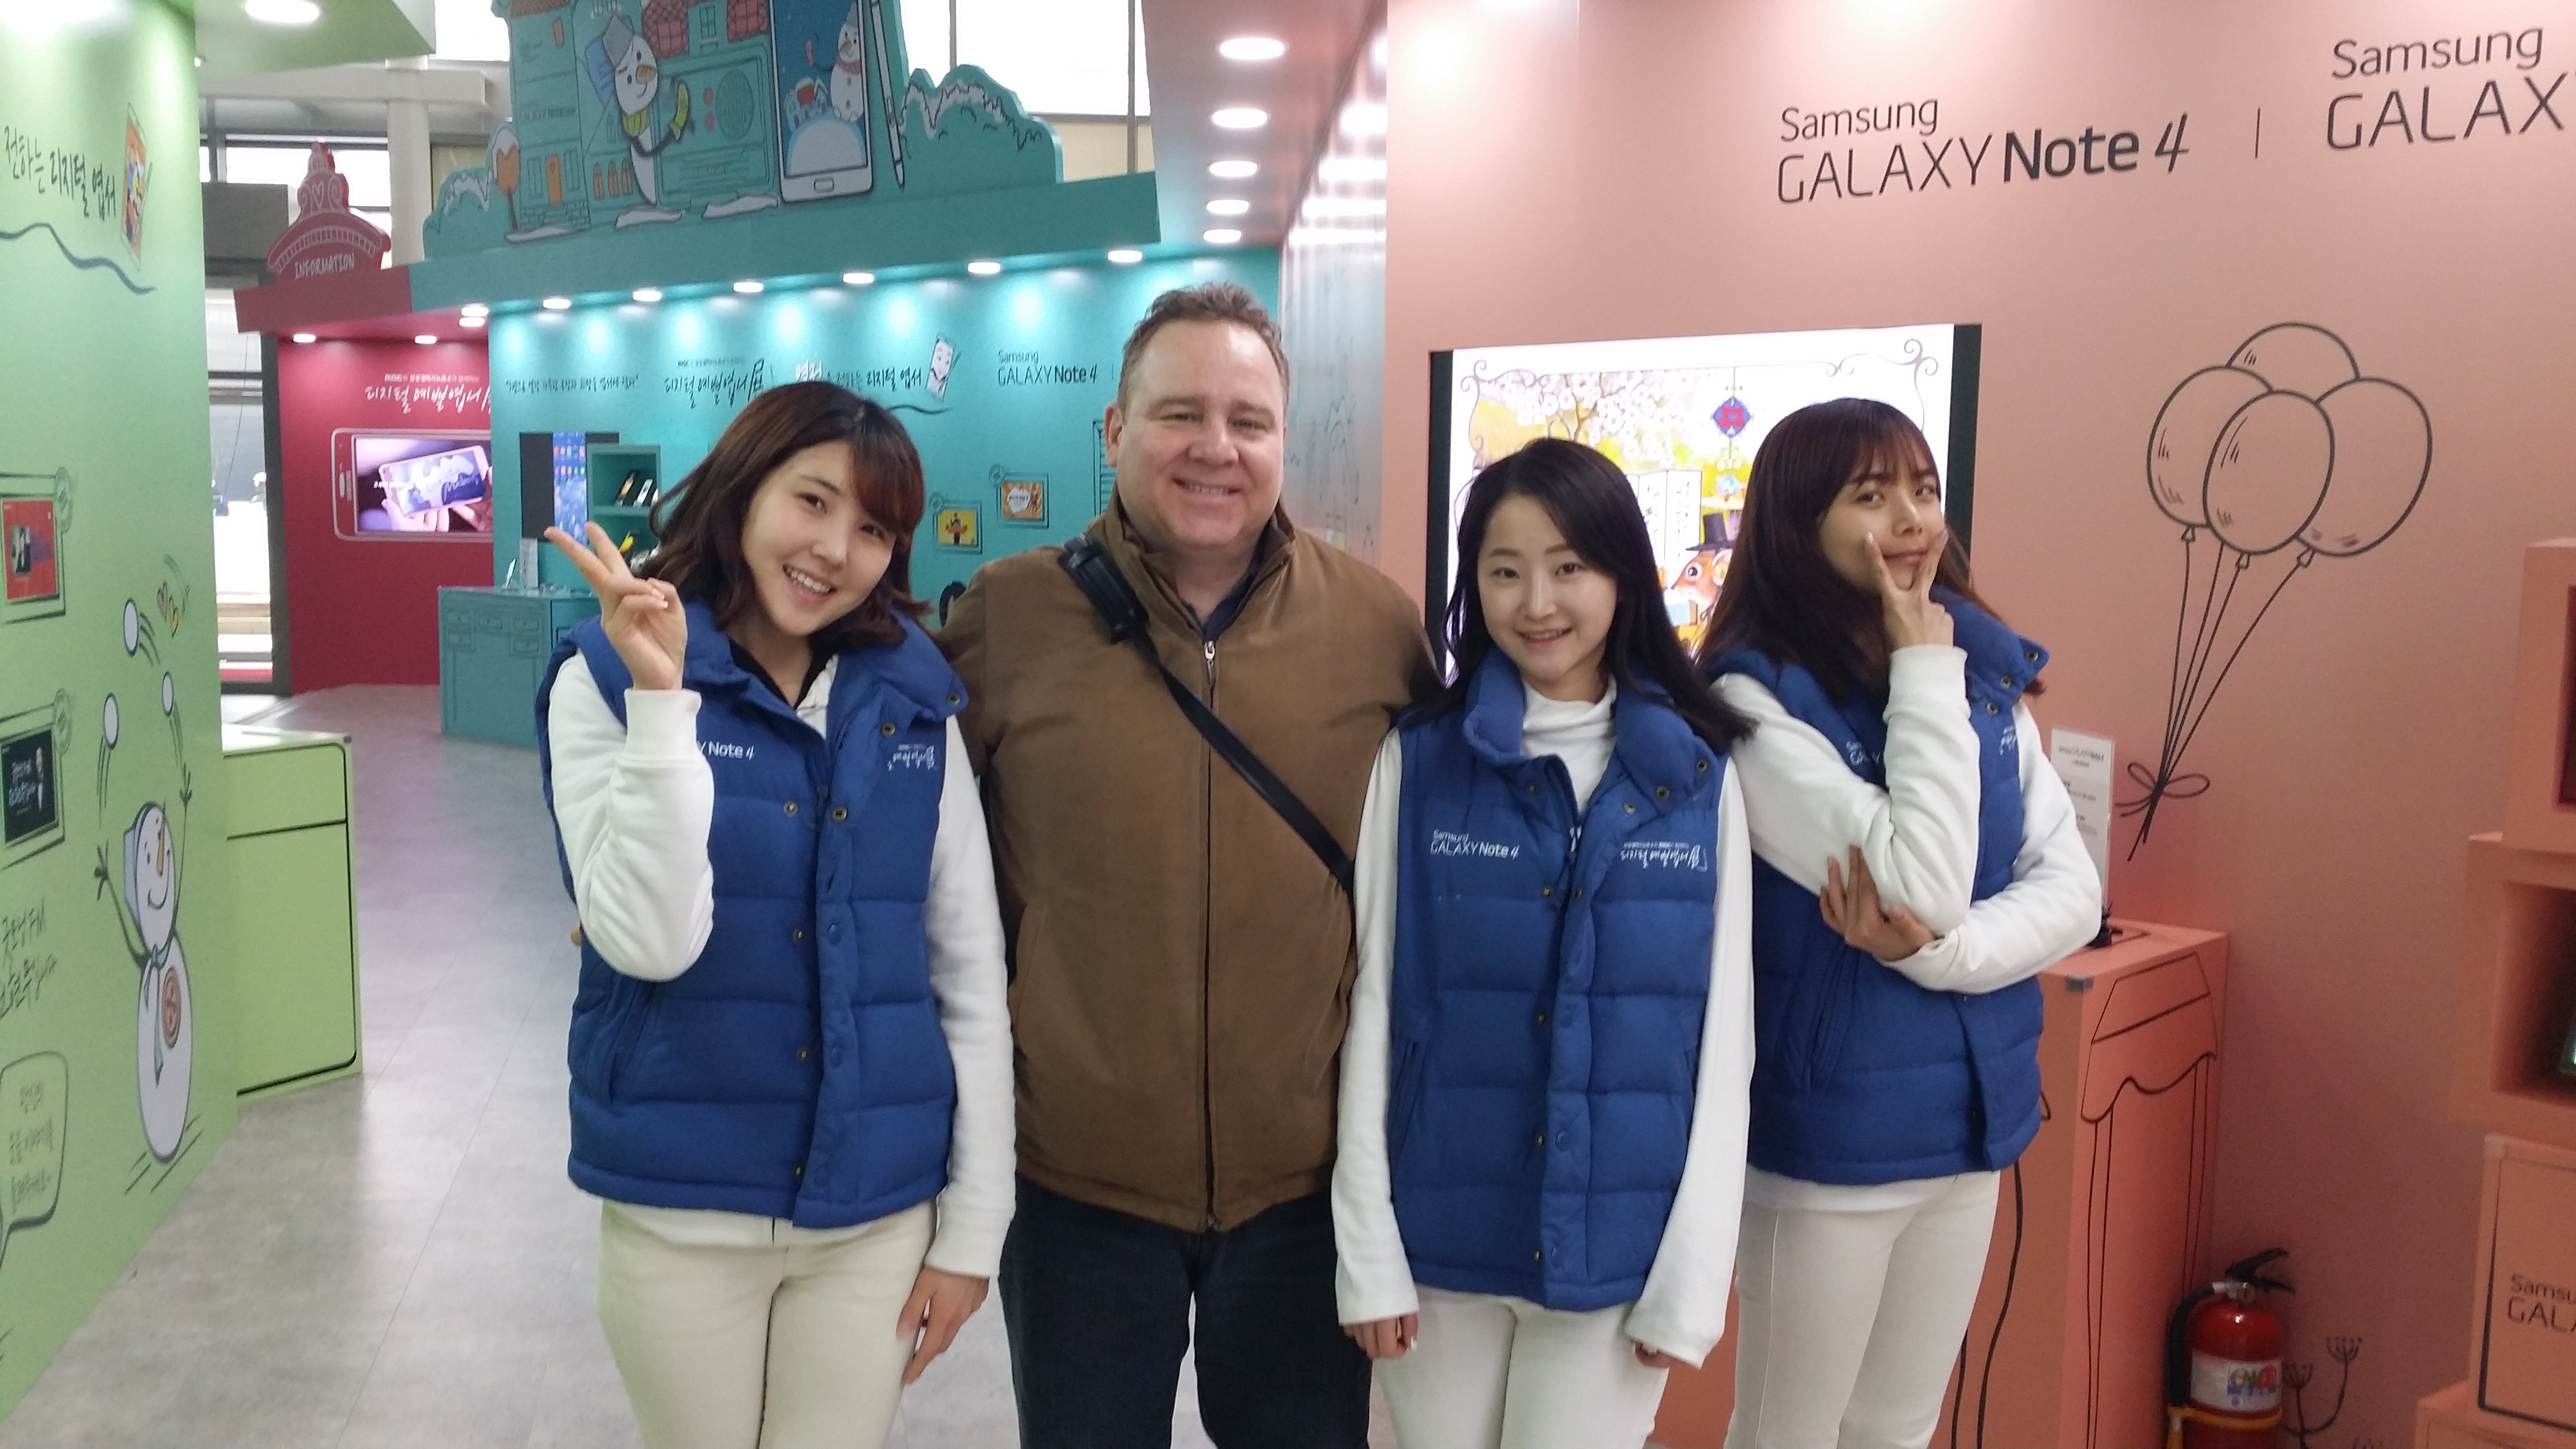 Dean Dawson poses with the spokeswomen of the Samsung Galaxy Note 4.